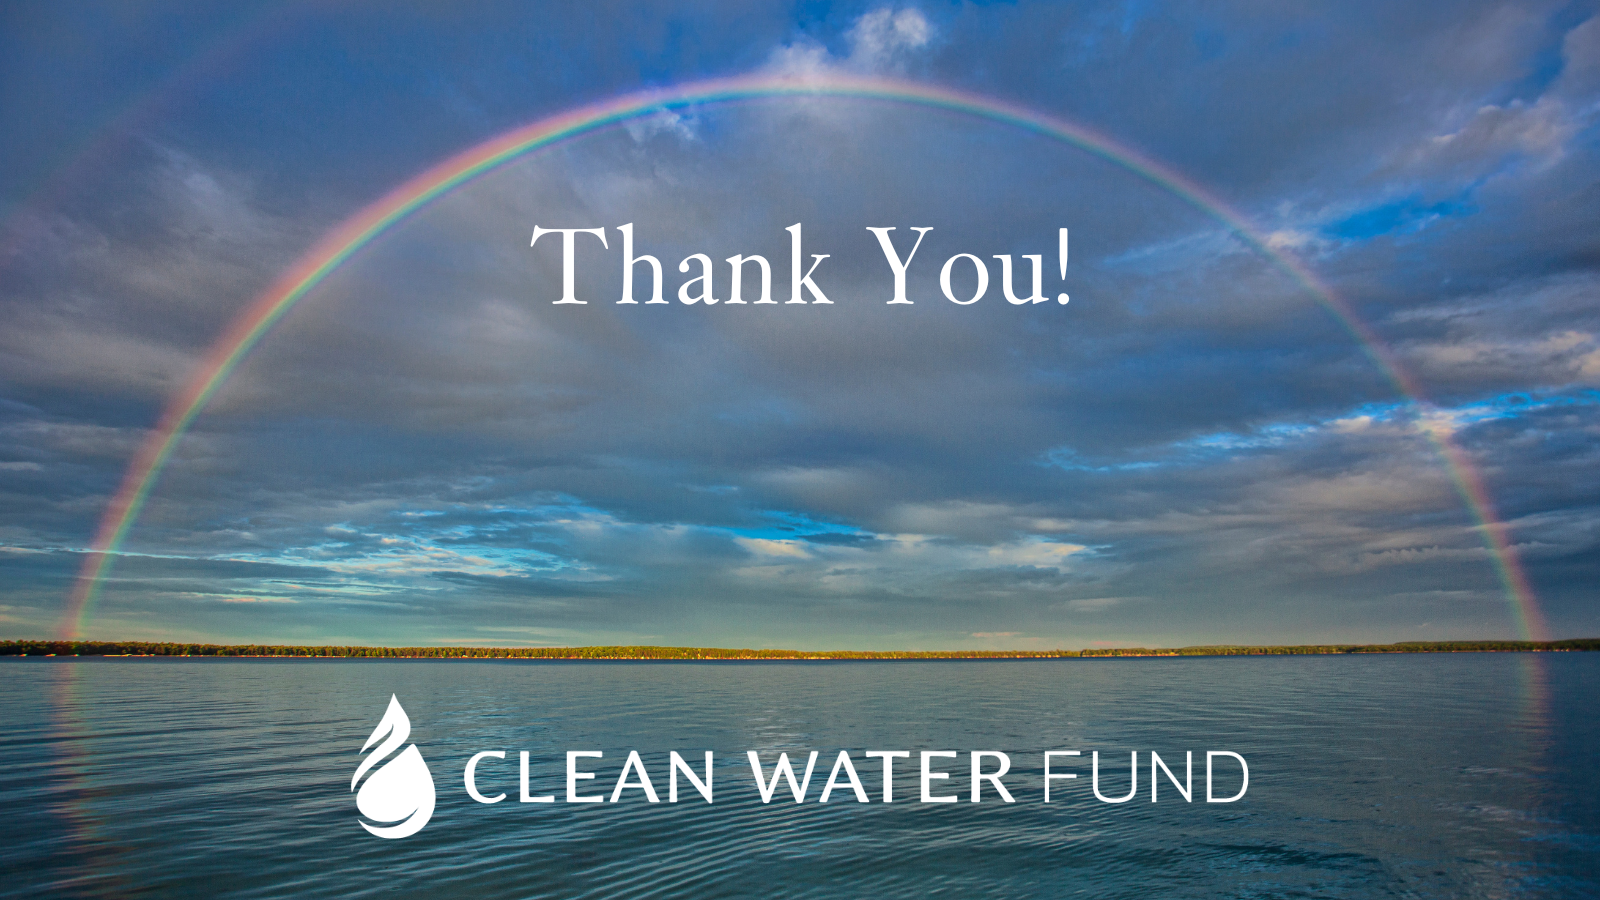 Full rainbow over gently rippling lake. Caption: Thank You!, Clean Water Fund